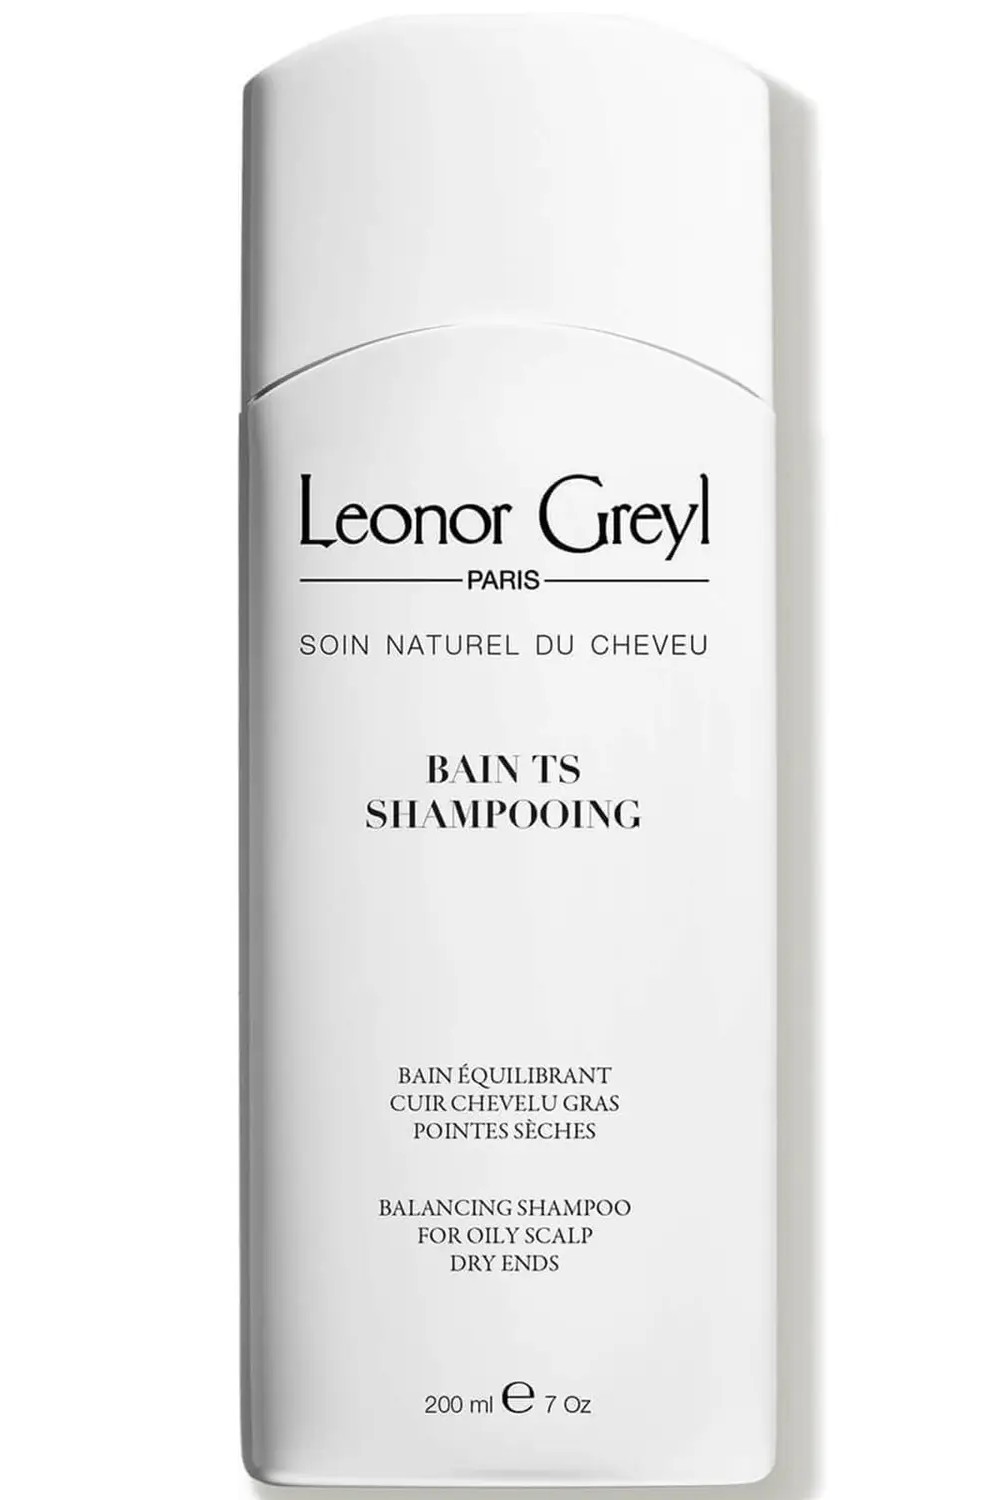 Best Shampoos and Conditioners Reviews | Leonor Greyl Bain TS Shampooing Balancing Shampoo Review